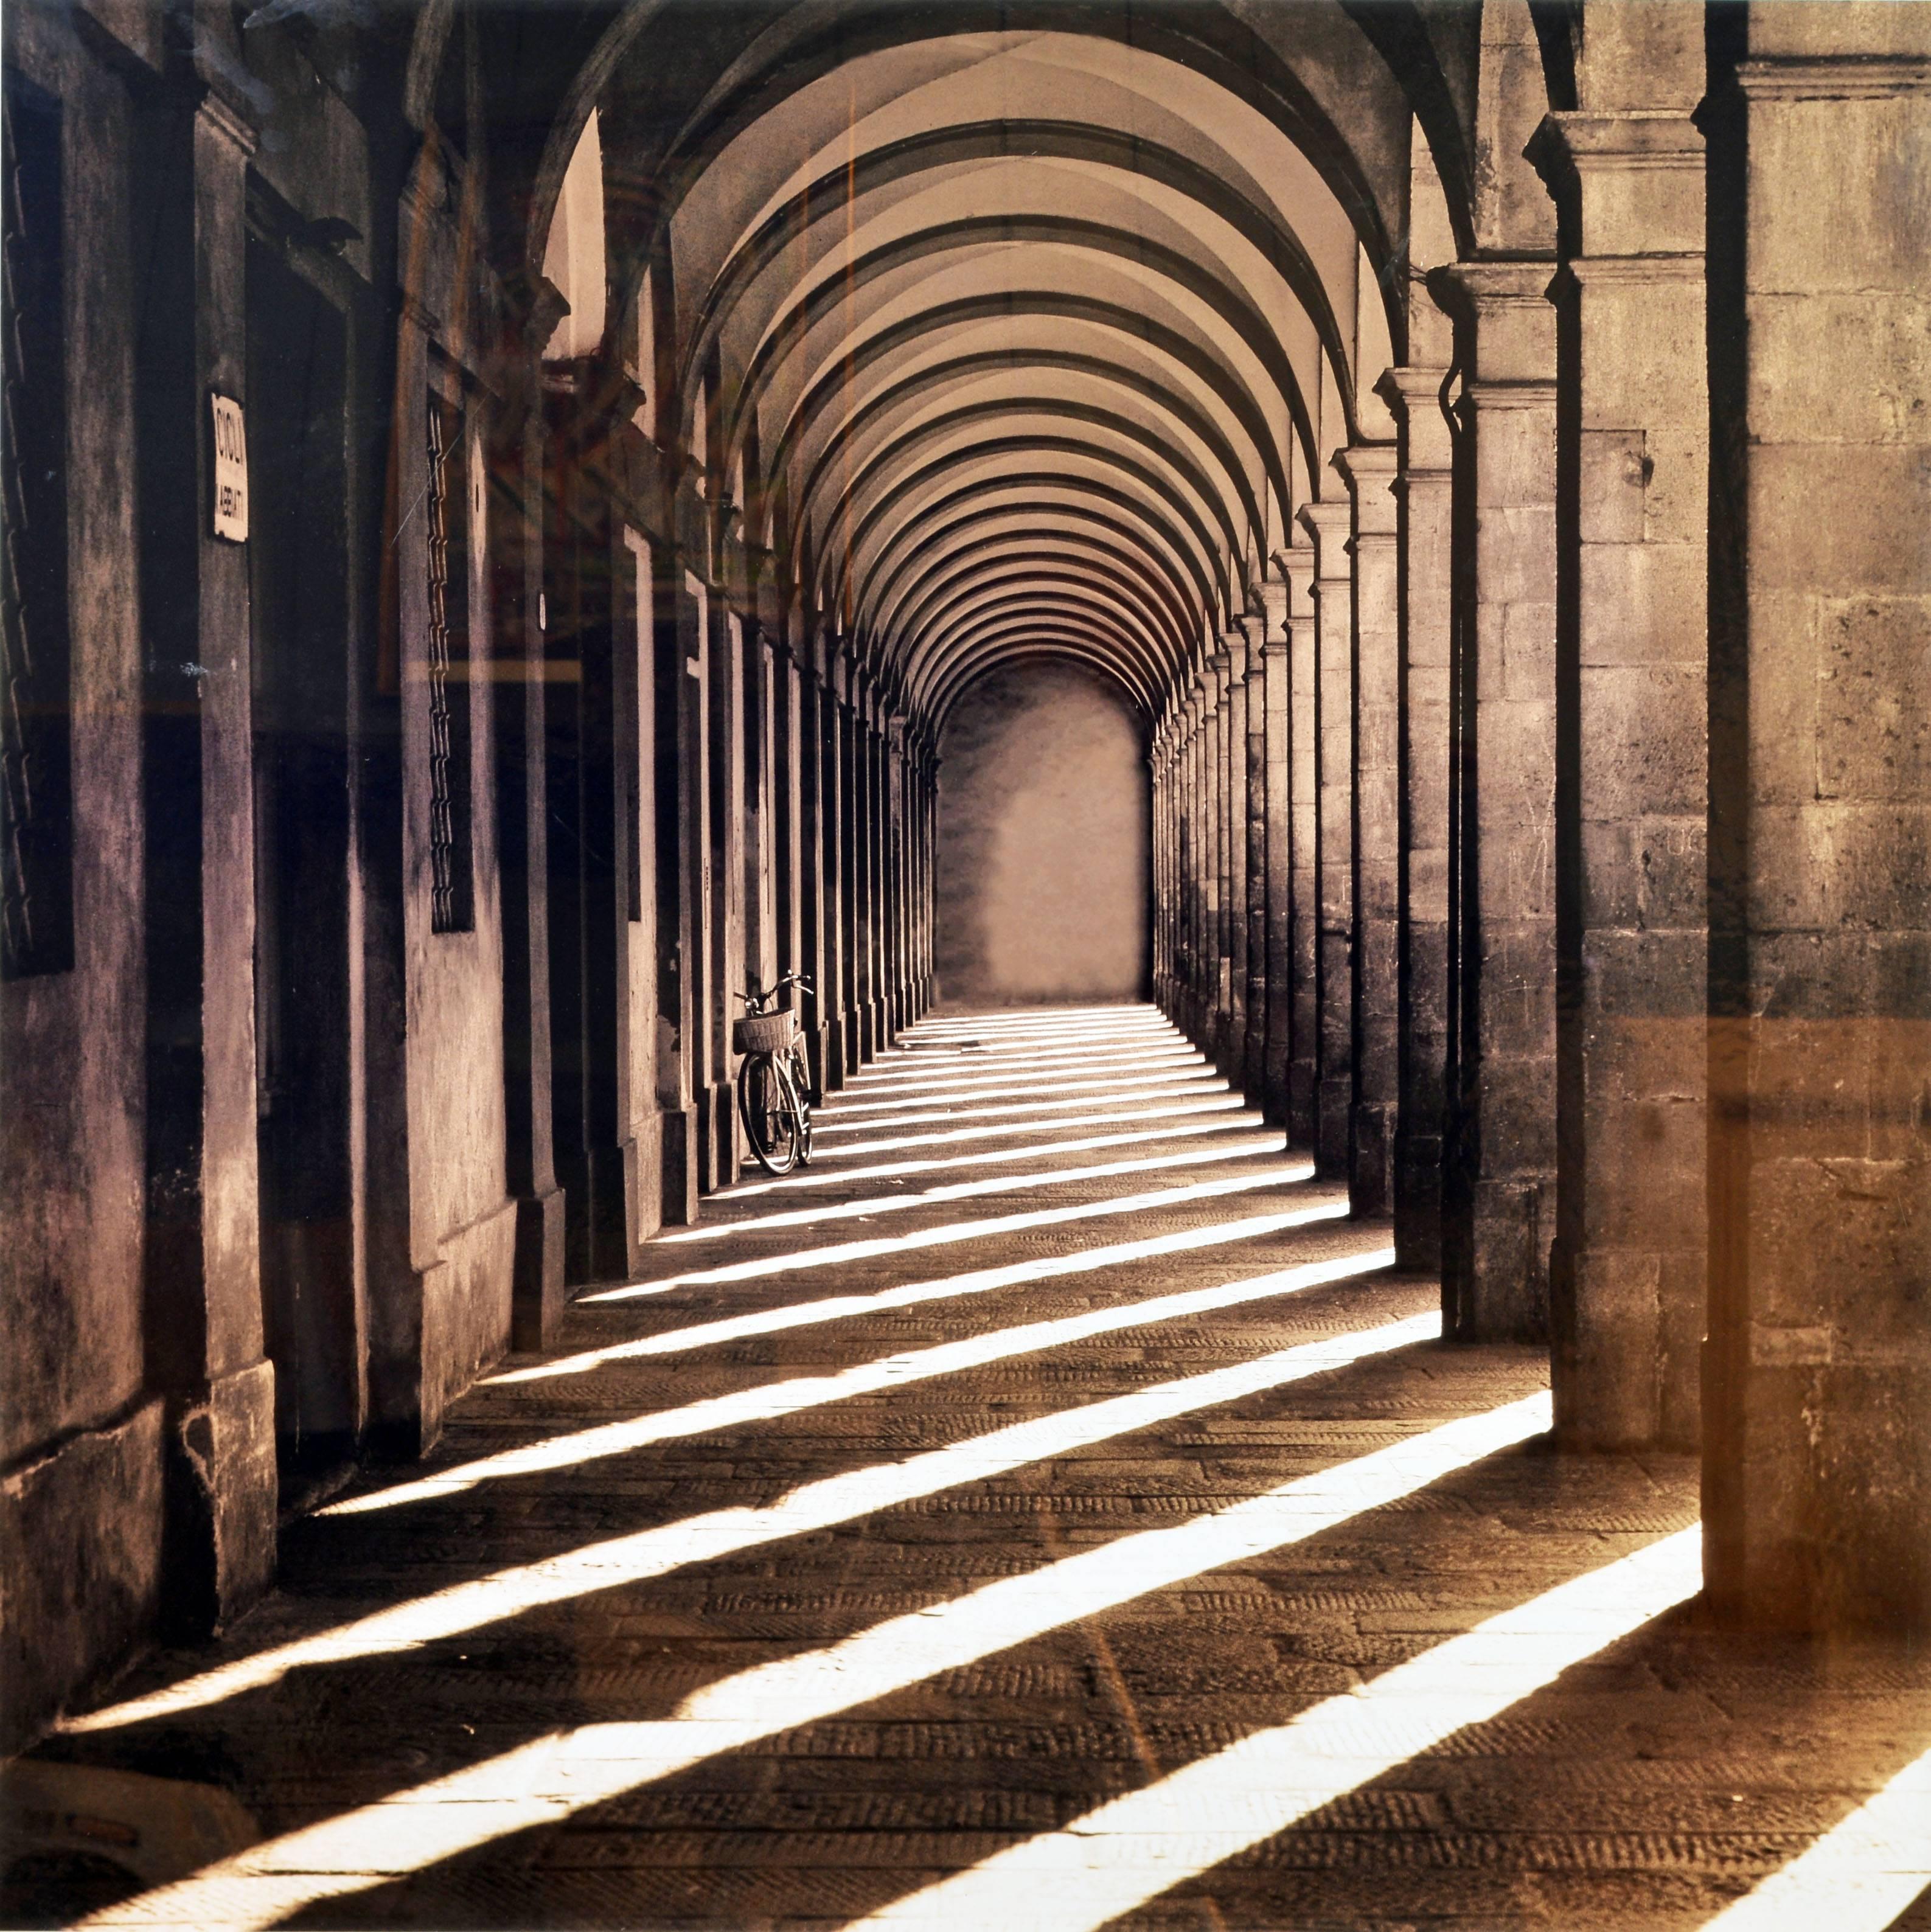 This large Sepia tone photograph from Lucca in Tuscany, Italy, measures 42 x 42 inches framed (image size 37 x 37 in.) and is a C type Lambda chromogenic photo print on Fuji Crystal Archive photo paper. It is part of a limited edition of 195.